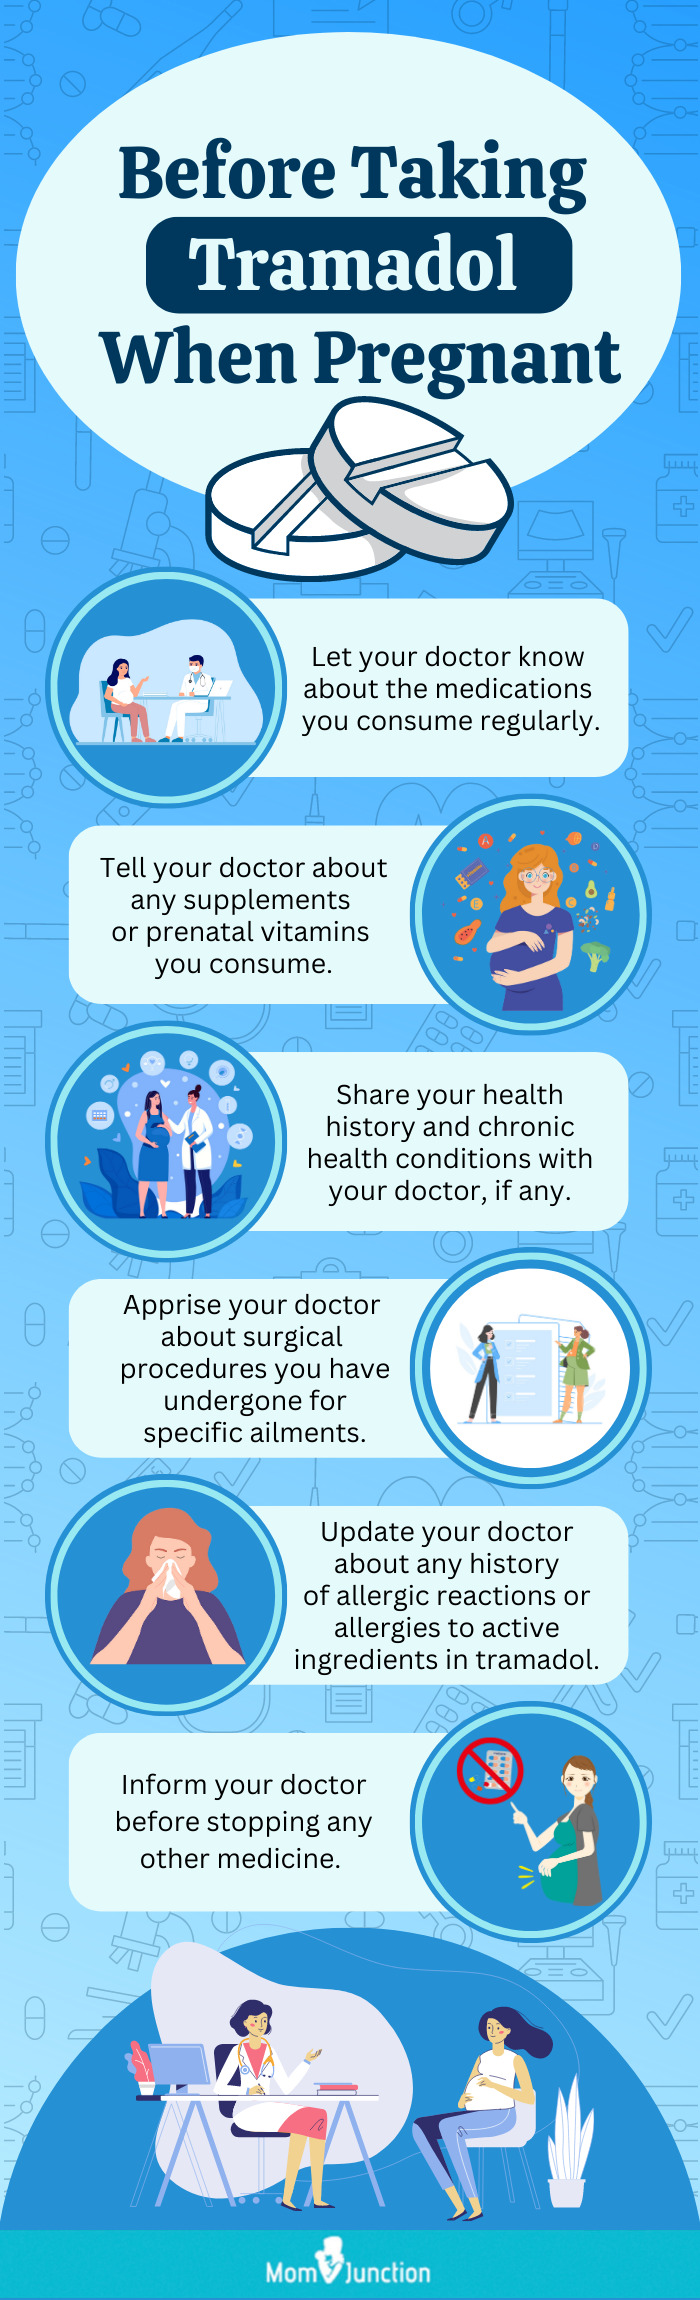 precautions for taking tramadol in pregnancy [infographic]